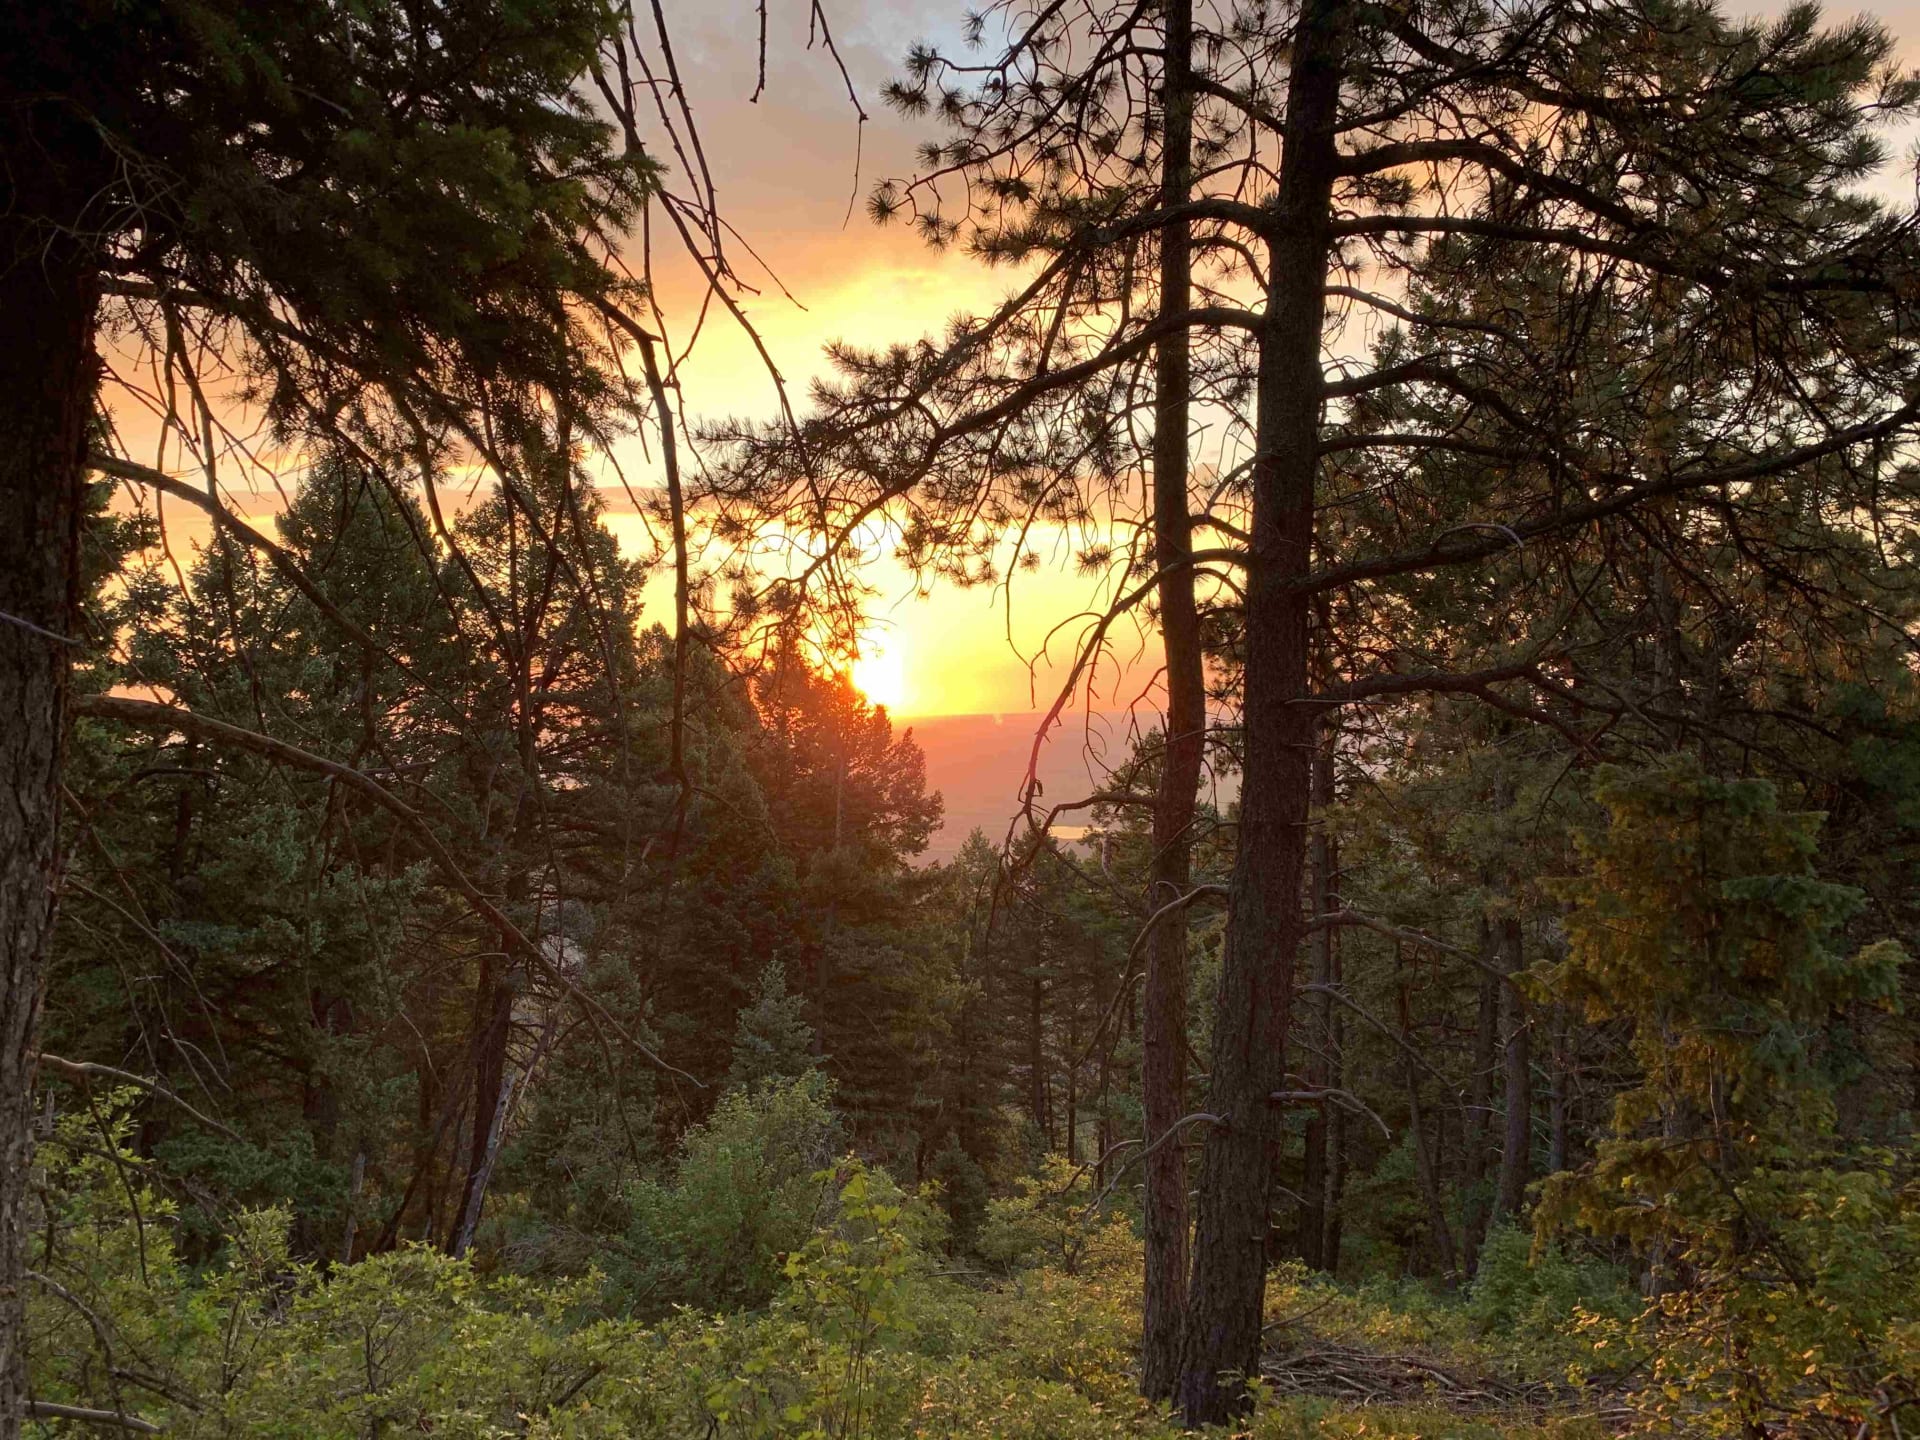 Sunrise through the forest, right by the campsite